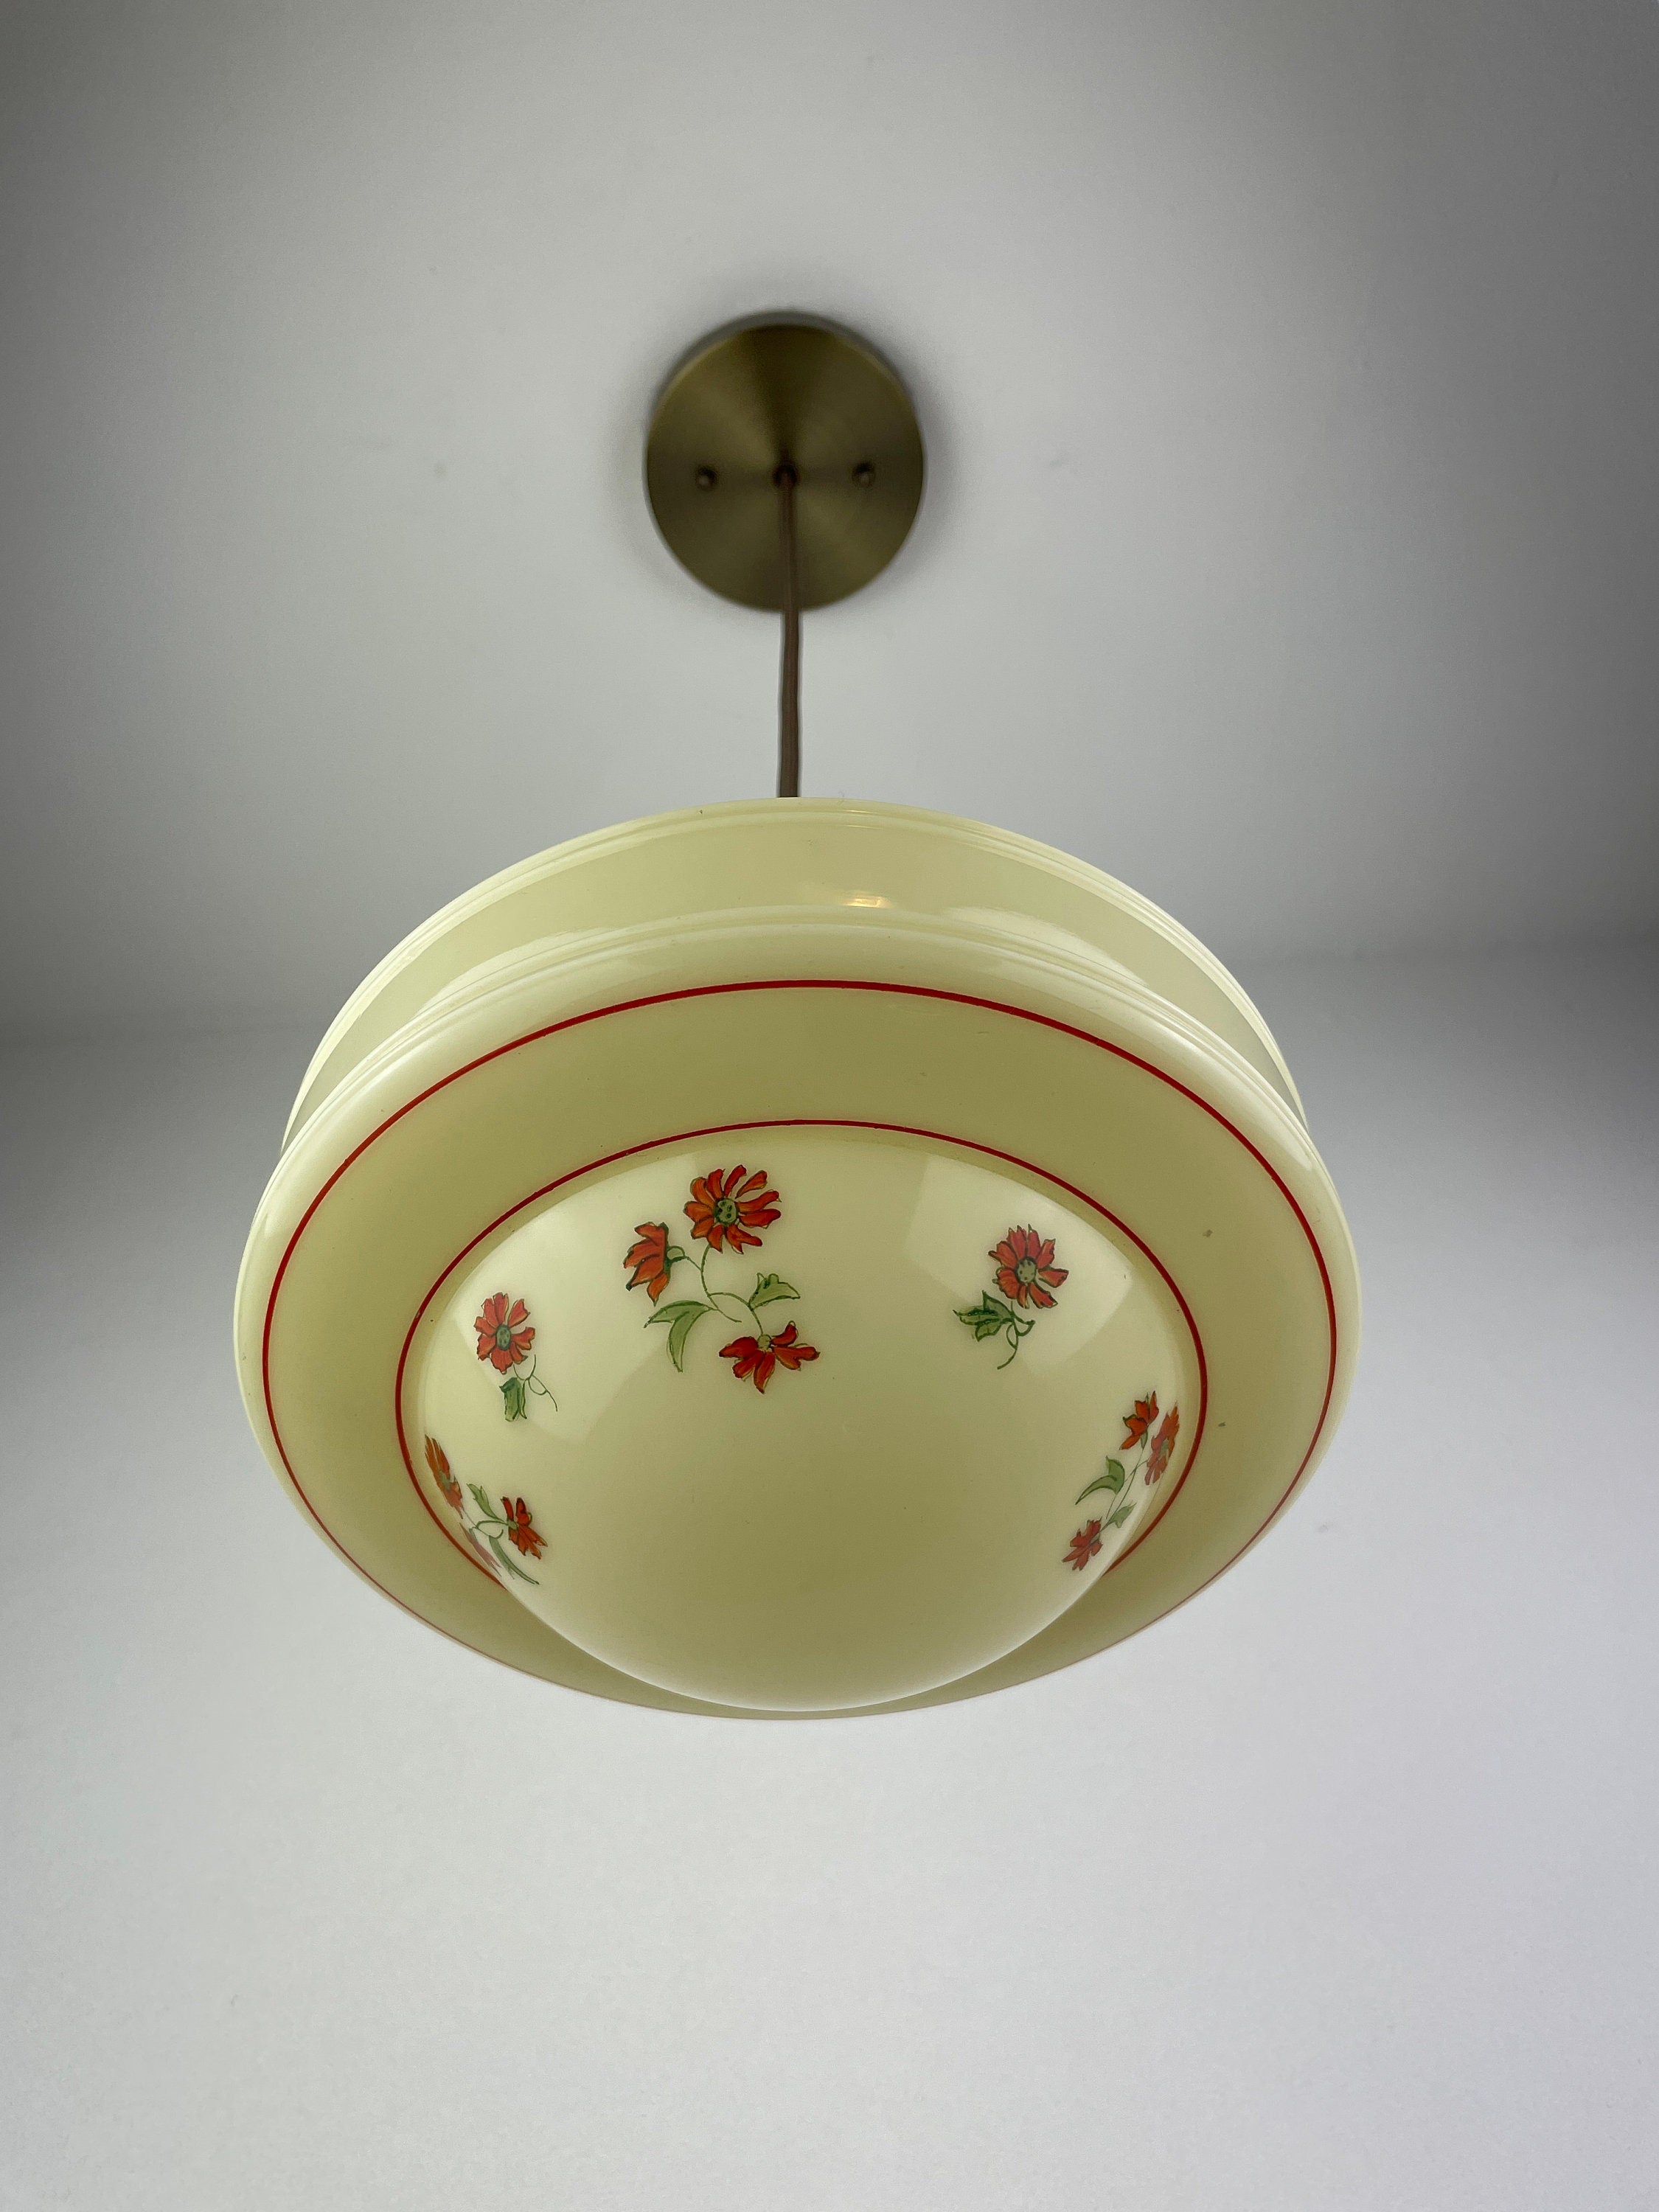 Beautiful Antique 1920's Custard Shade with Hand Painted Green & Red Flowers with Antique Brass Hardware